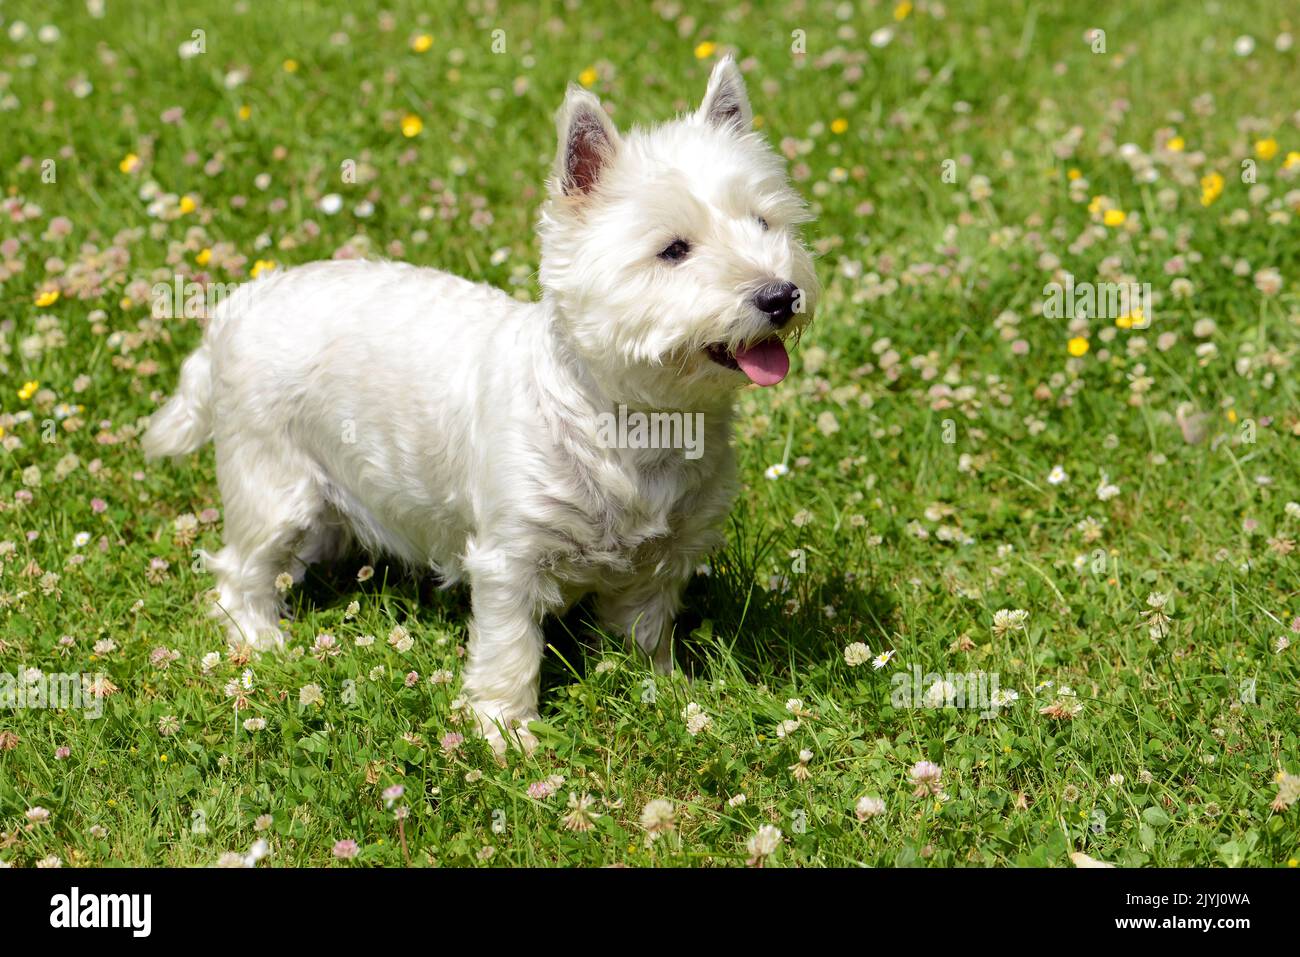 Yorkshire Terrier (Canis lupus f. familiaris), kleines weißes Weibchen Yorkshire Terrier auf einer Wiese Stockfoto